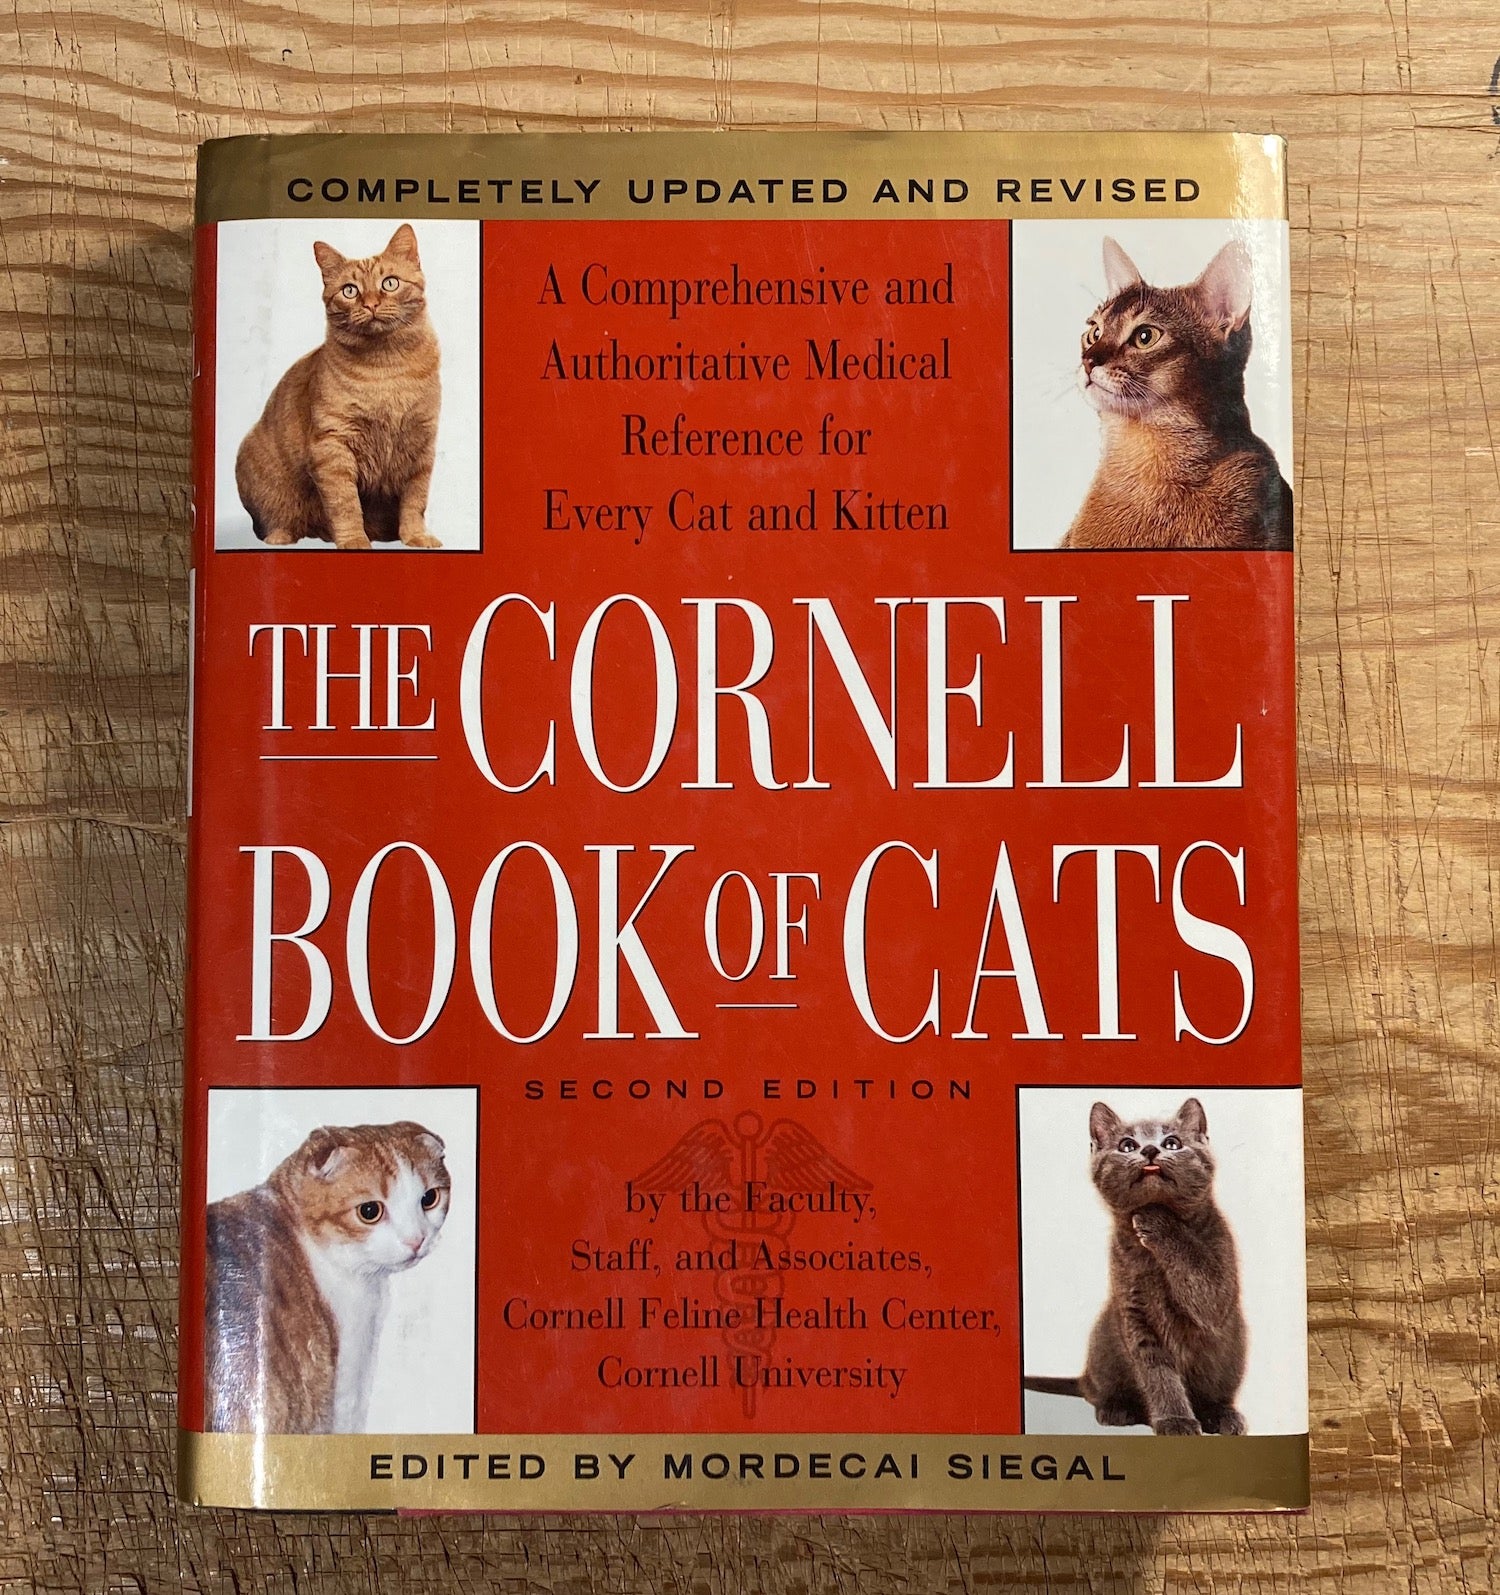 The Cornell Book of Cats: A Comprehensive & Authoritative Medical Reference for Every Cat & Kitten, used